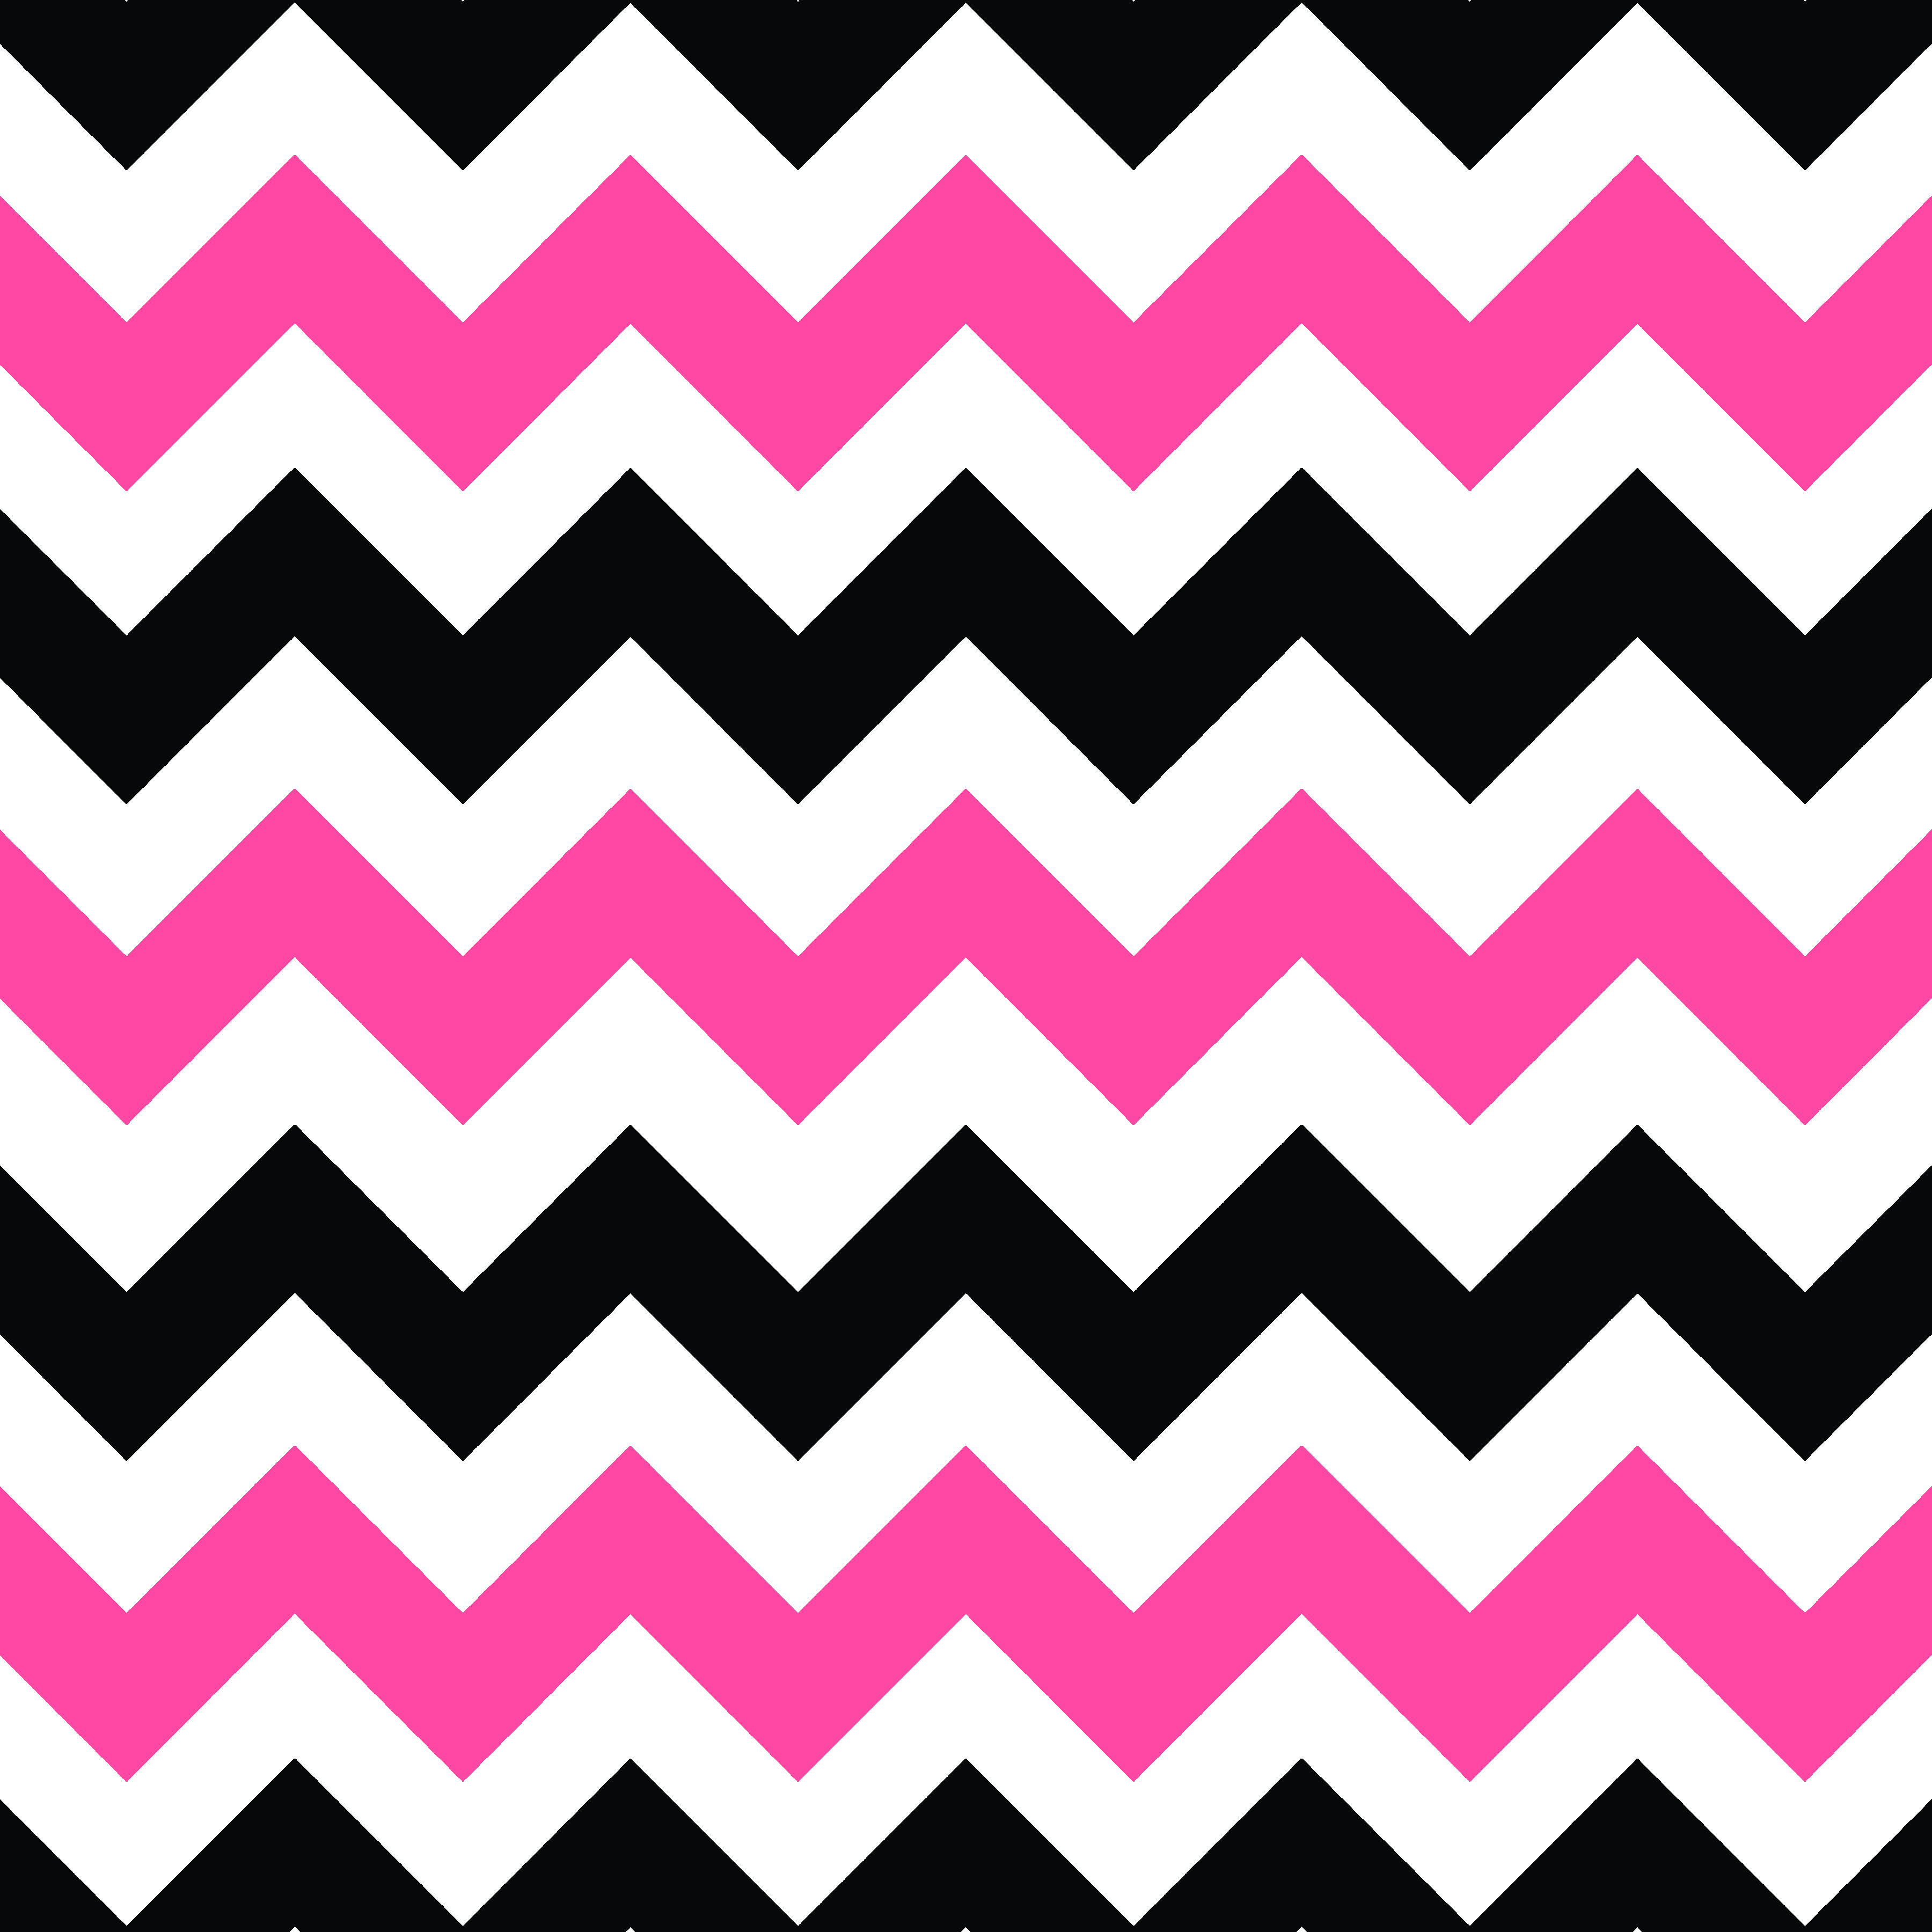 Set #2: 6 Free Mulit-Colored Chevron Printable Papers » SHYbyDESIGN